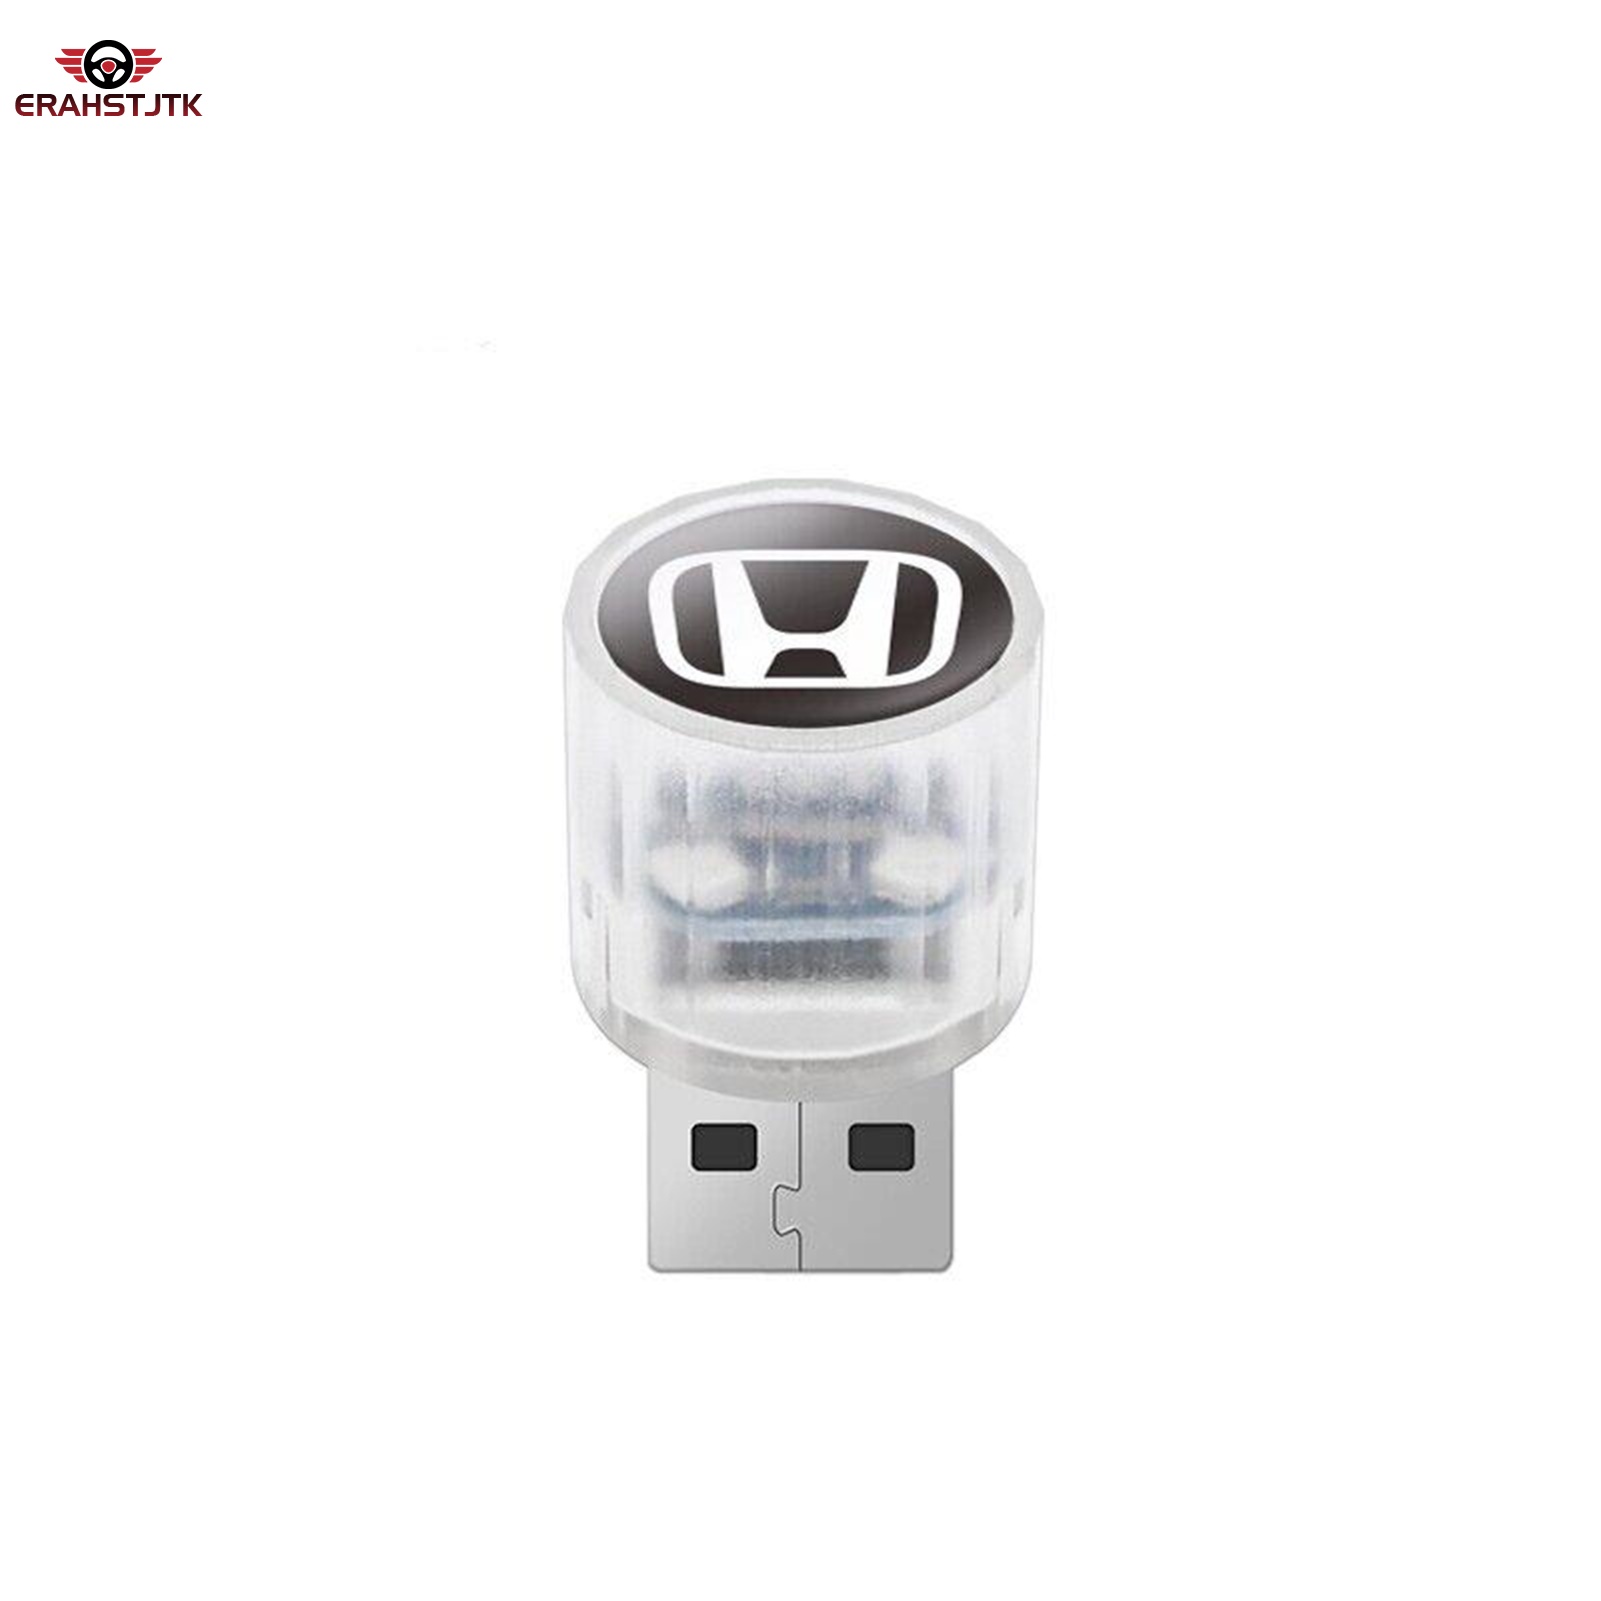 Car USB LED Night Light Super Cool Unique Projector Lamp Ideal for